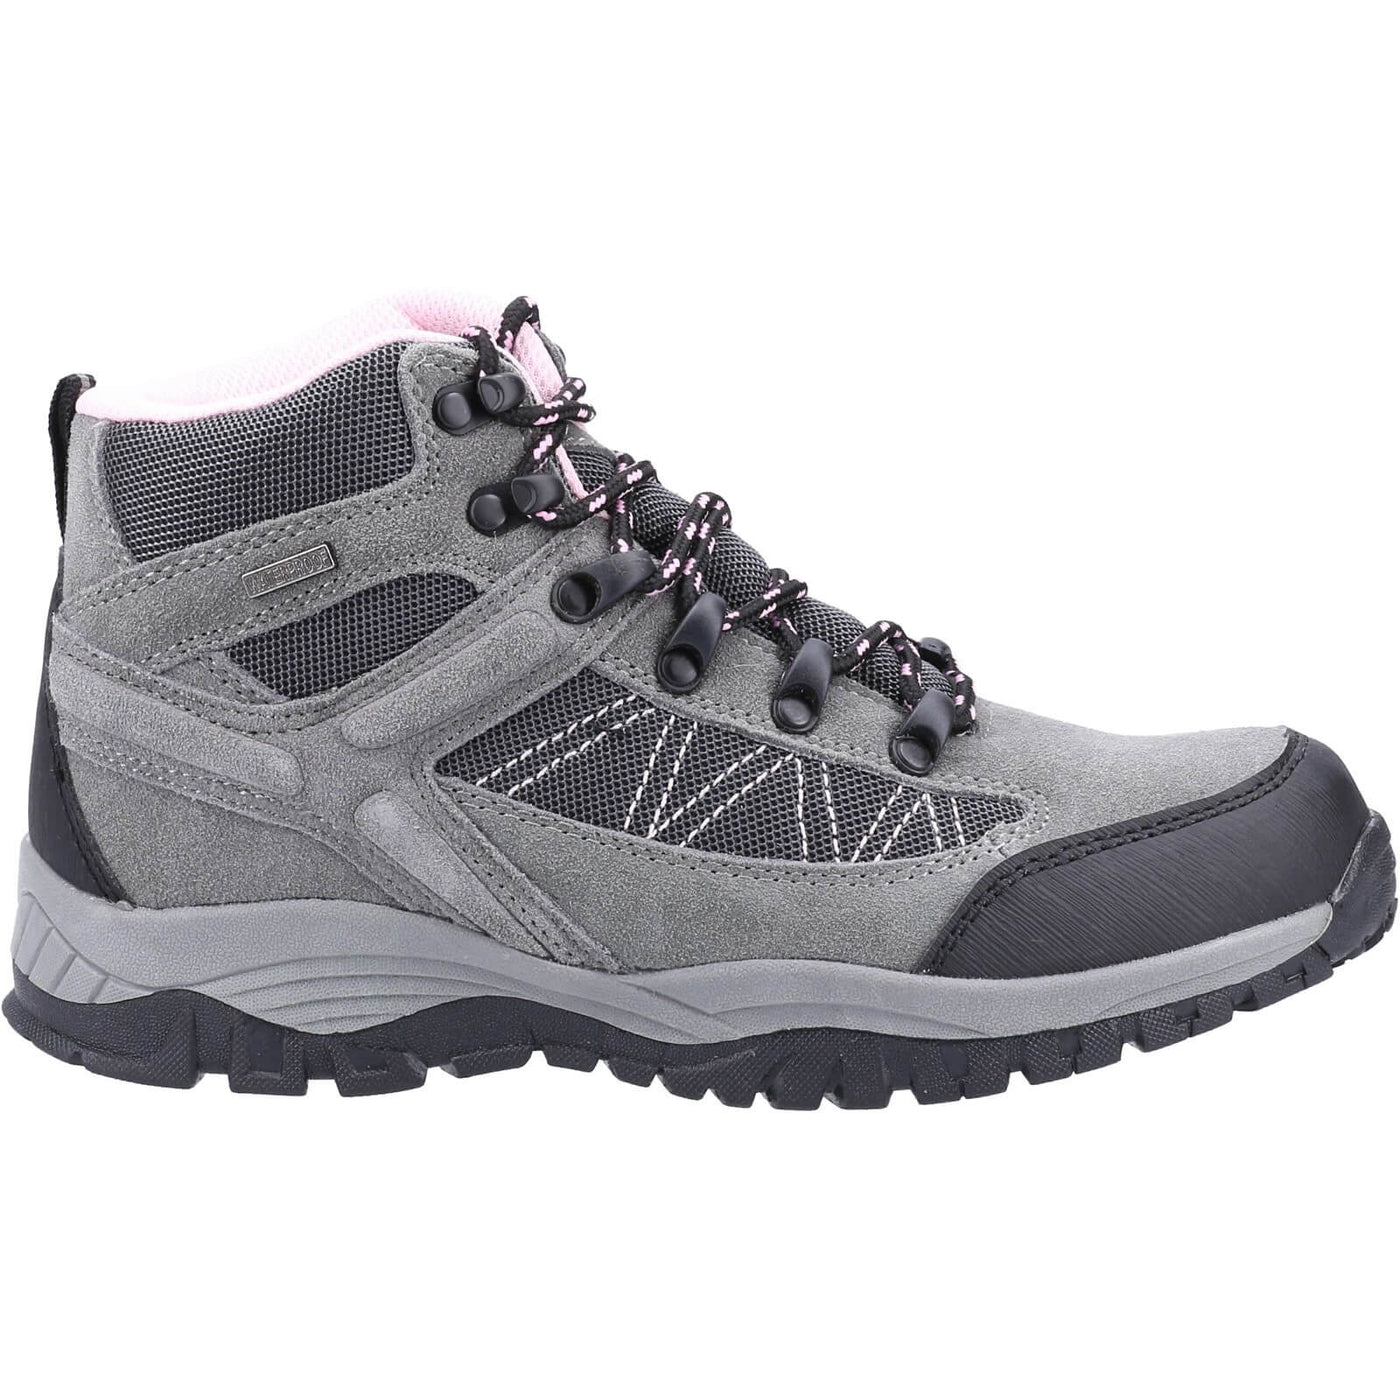 Cotswold Maisemore Ladies Hiking Boots Grey 4#colour_grey